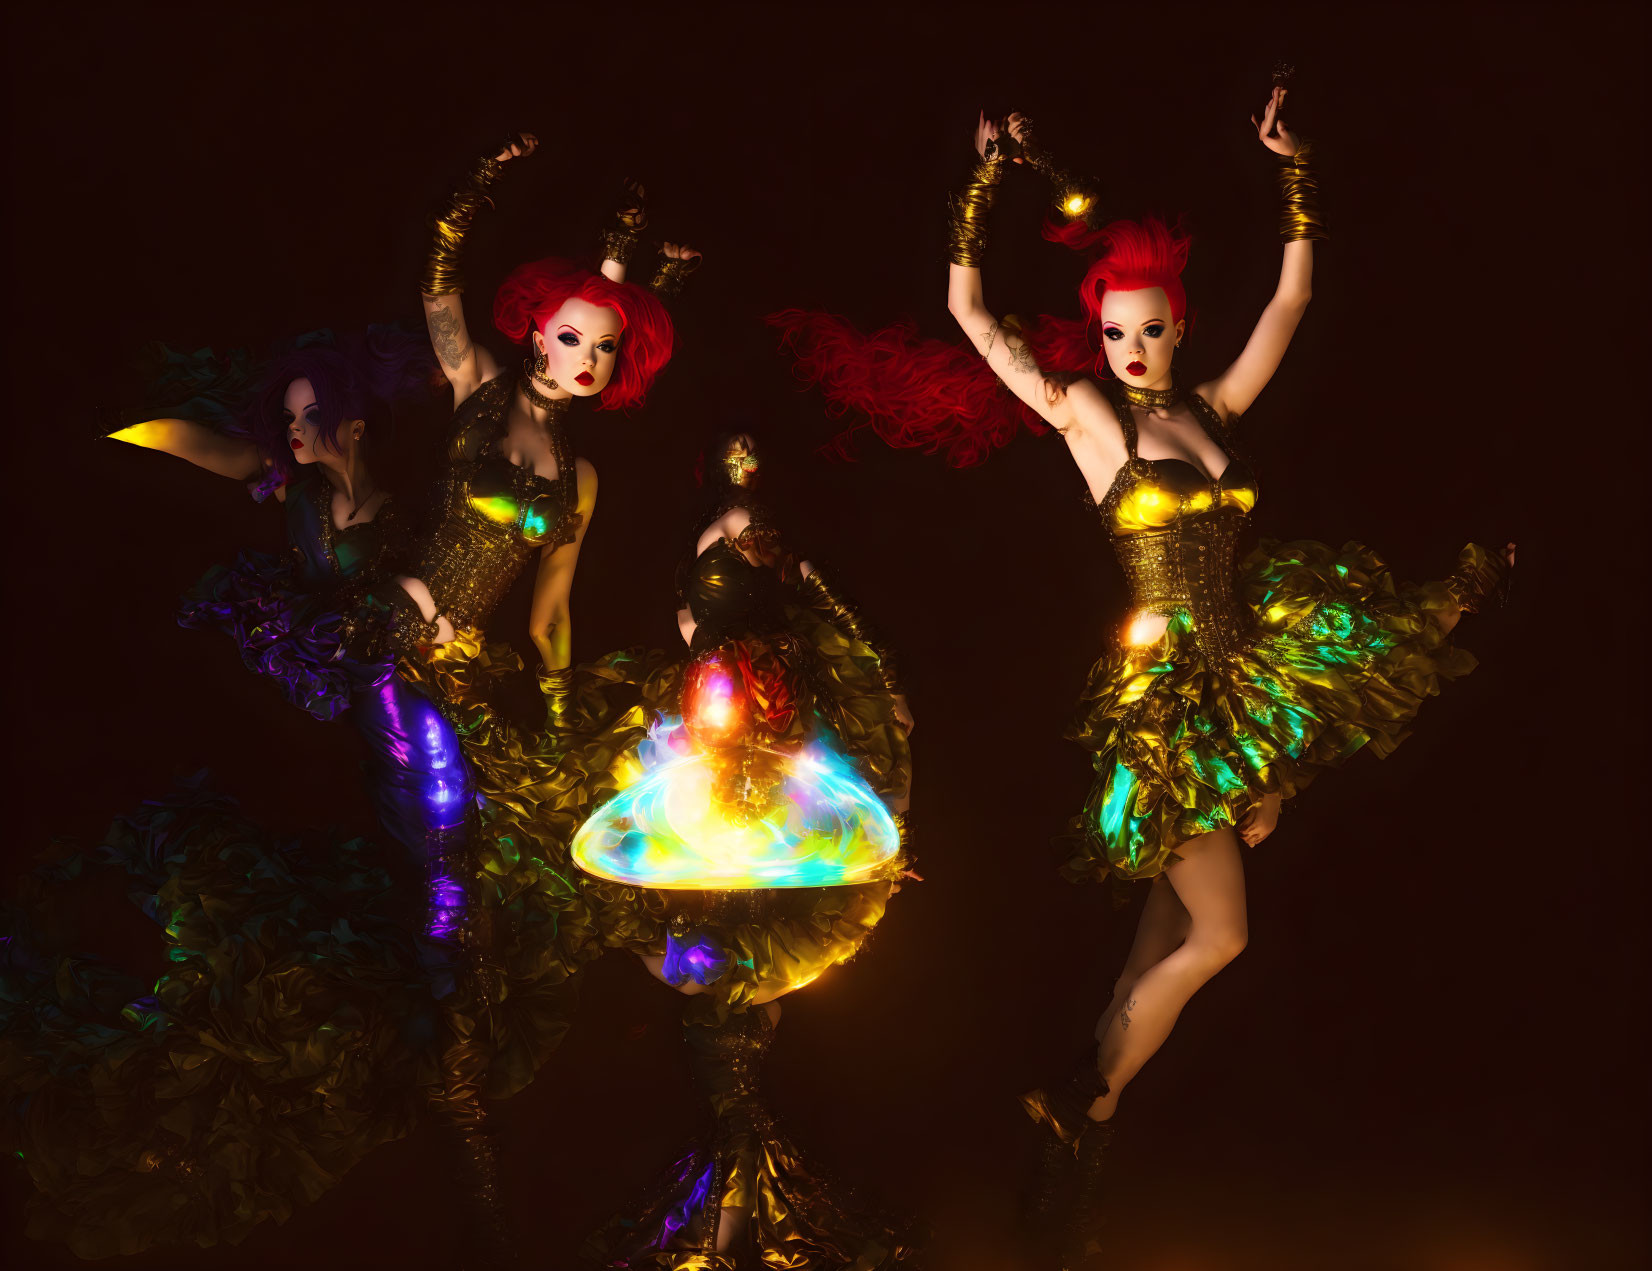 Vibrant dancers with red hair and gold costumes in dramatic makeup